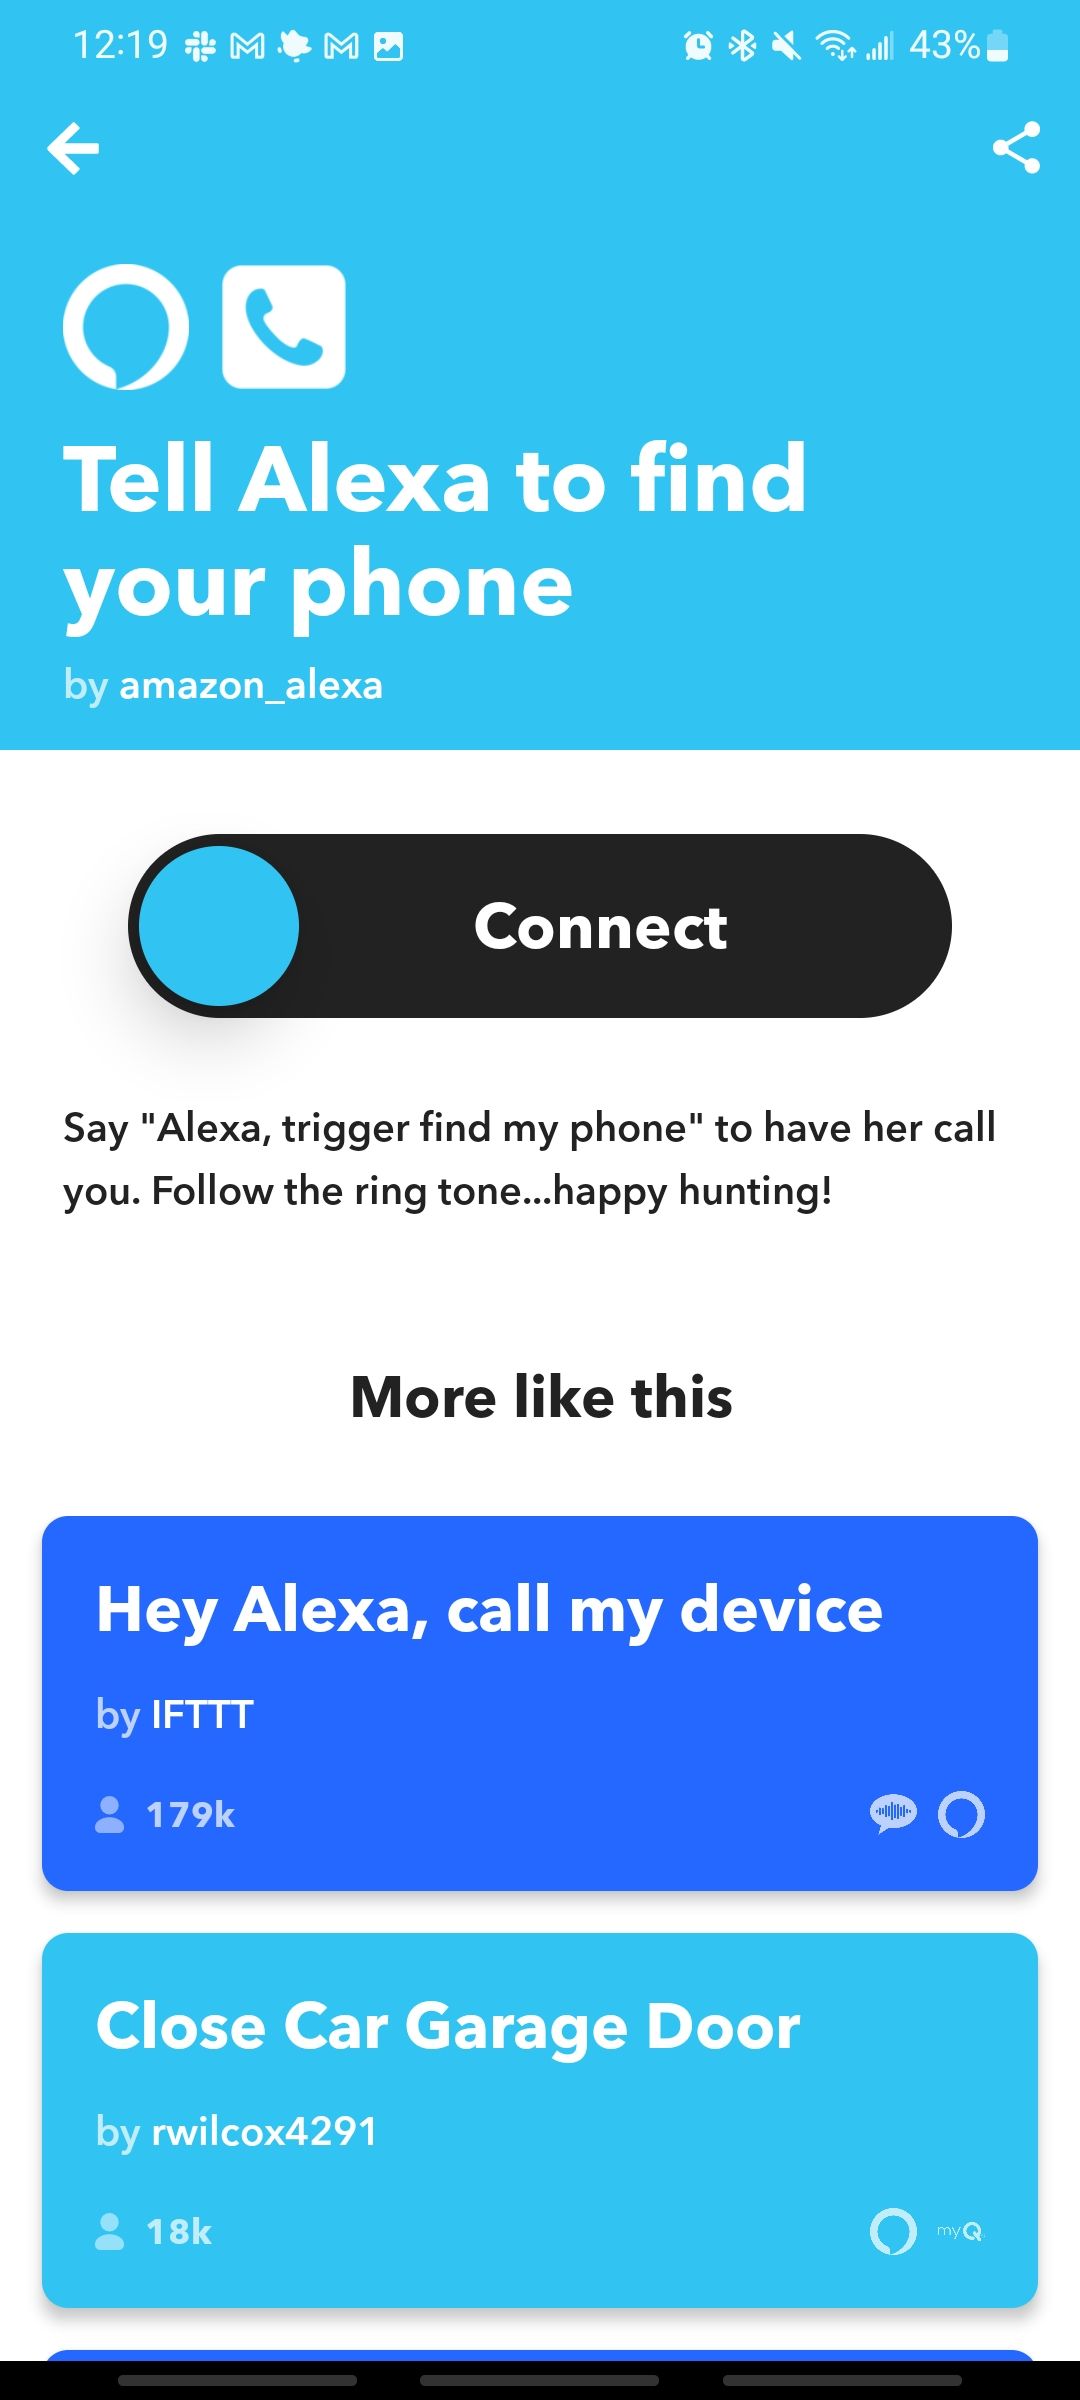 tell alexa to find your phone on ifttt app